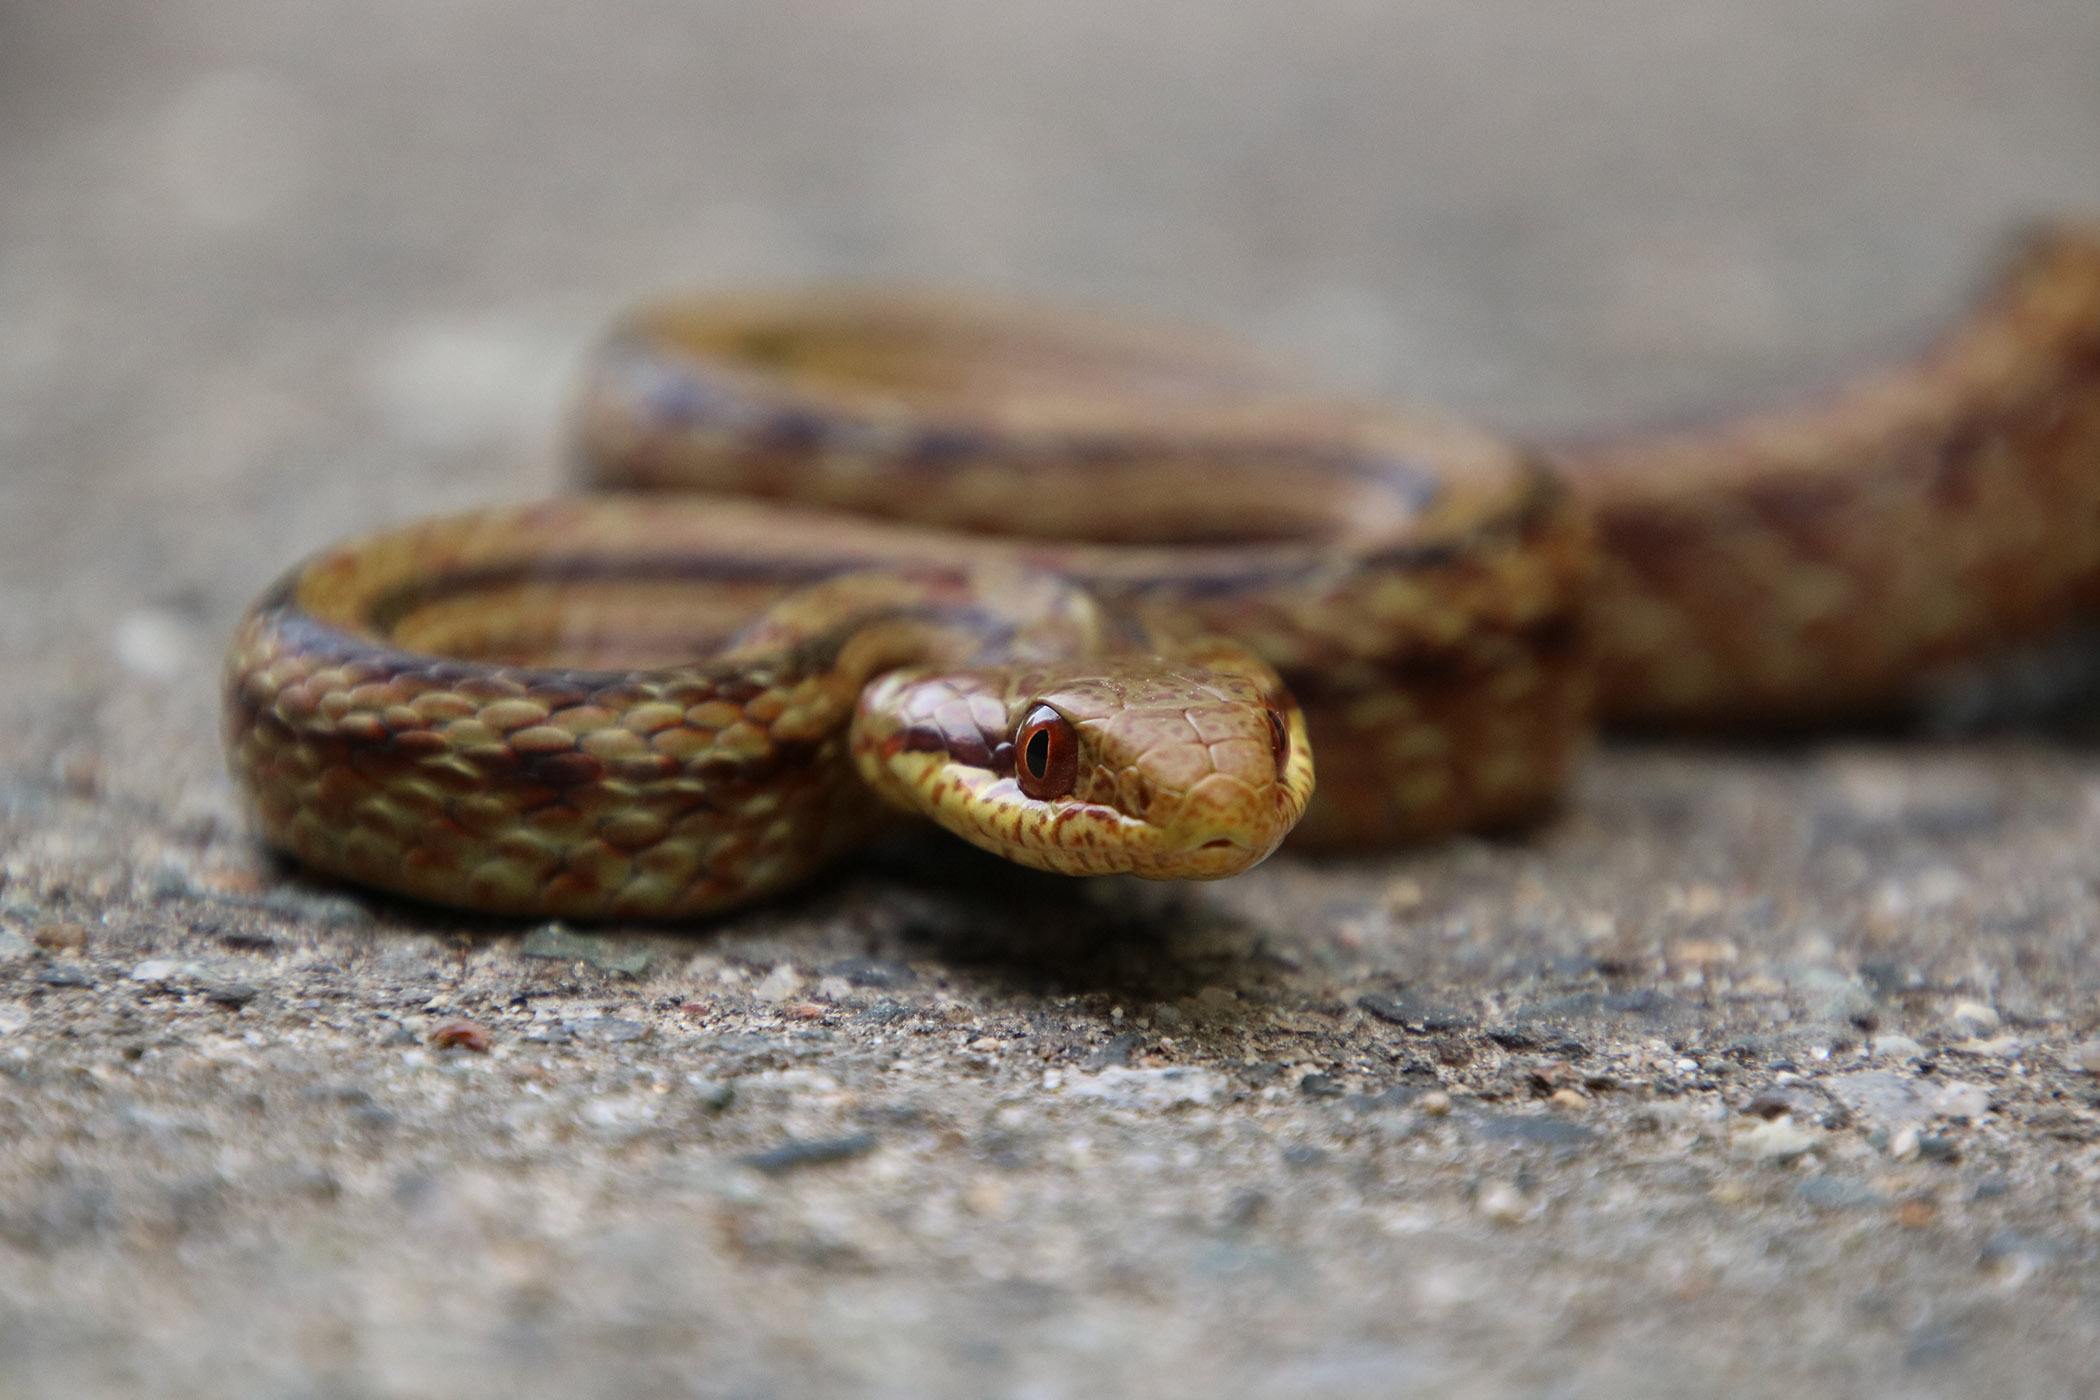 Researchers use snakes to monitor Fukushima radiation after accident